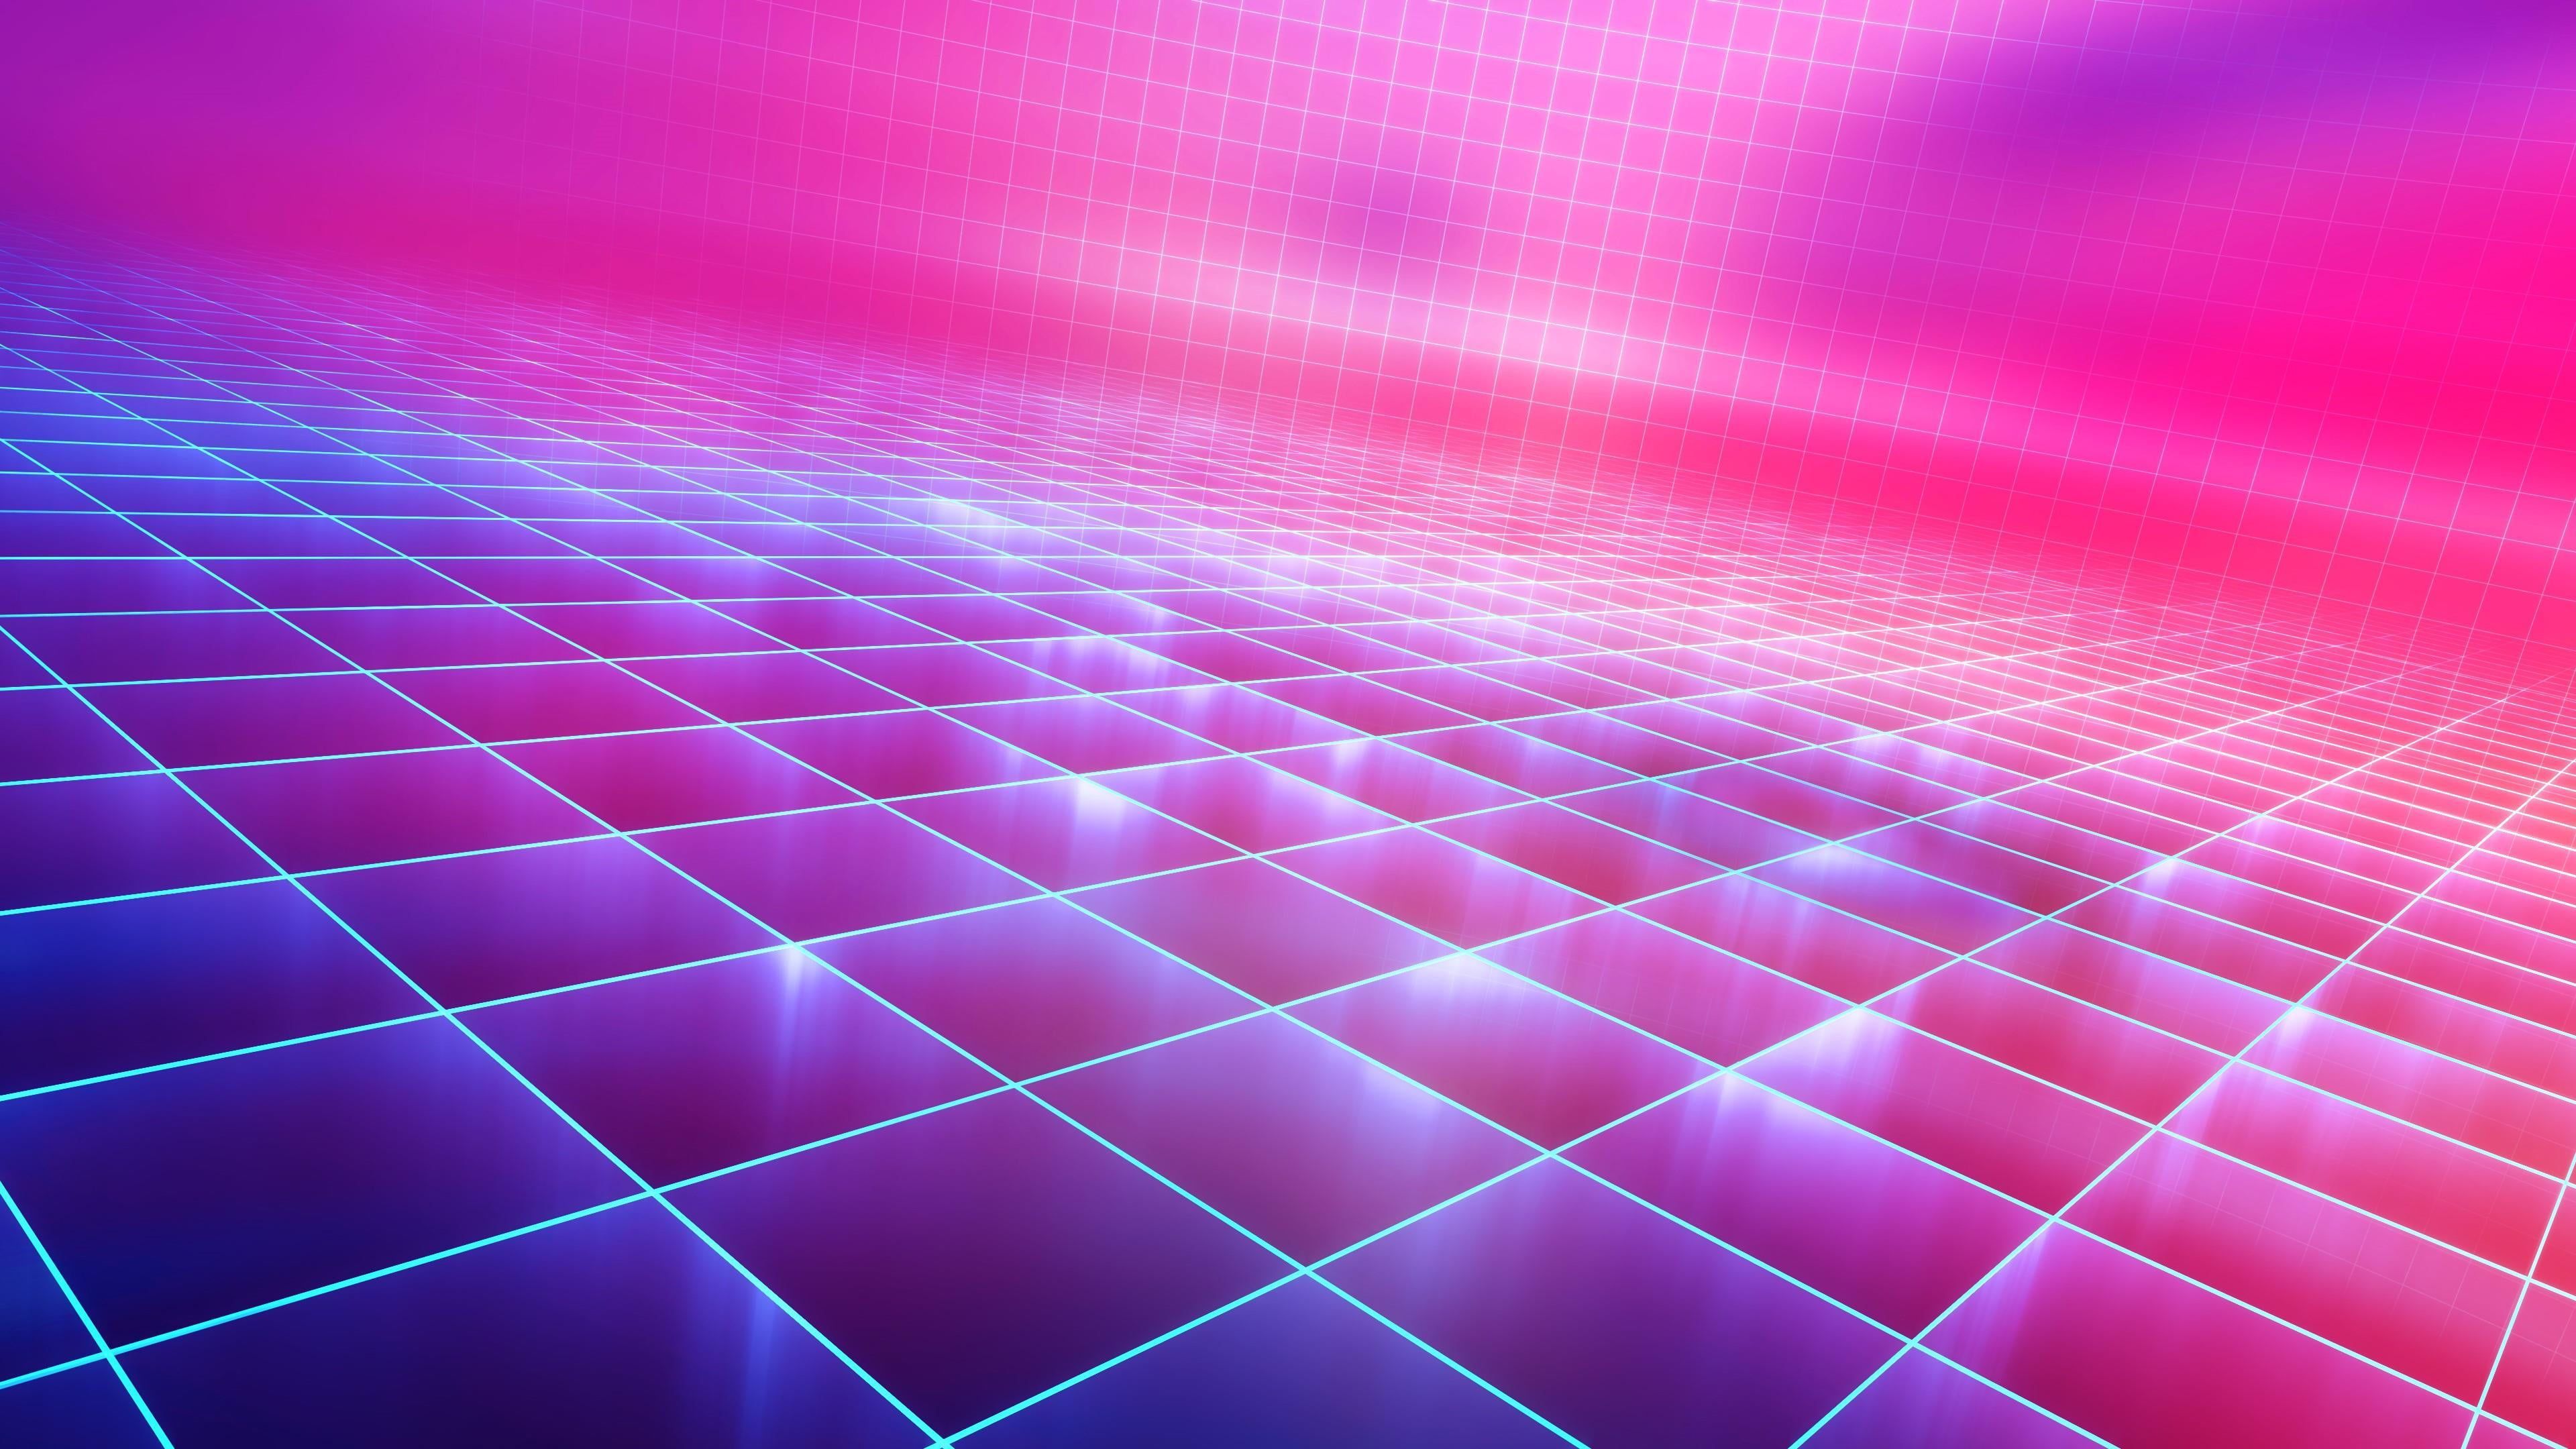 Music #Background s #Neon #Synth #Retrowave #Synthwave New Retro Wave #Futuresynth #Sintav #Retrouve #Outrun K. Vaporwave wallpaper, Synthwave, Retro waves